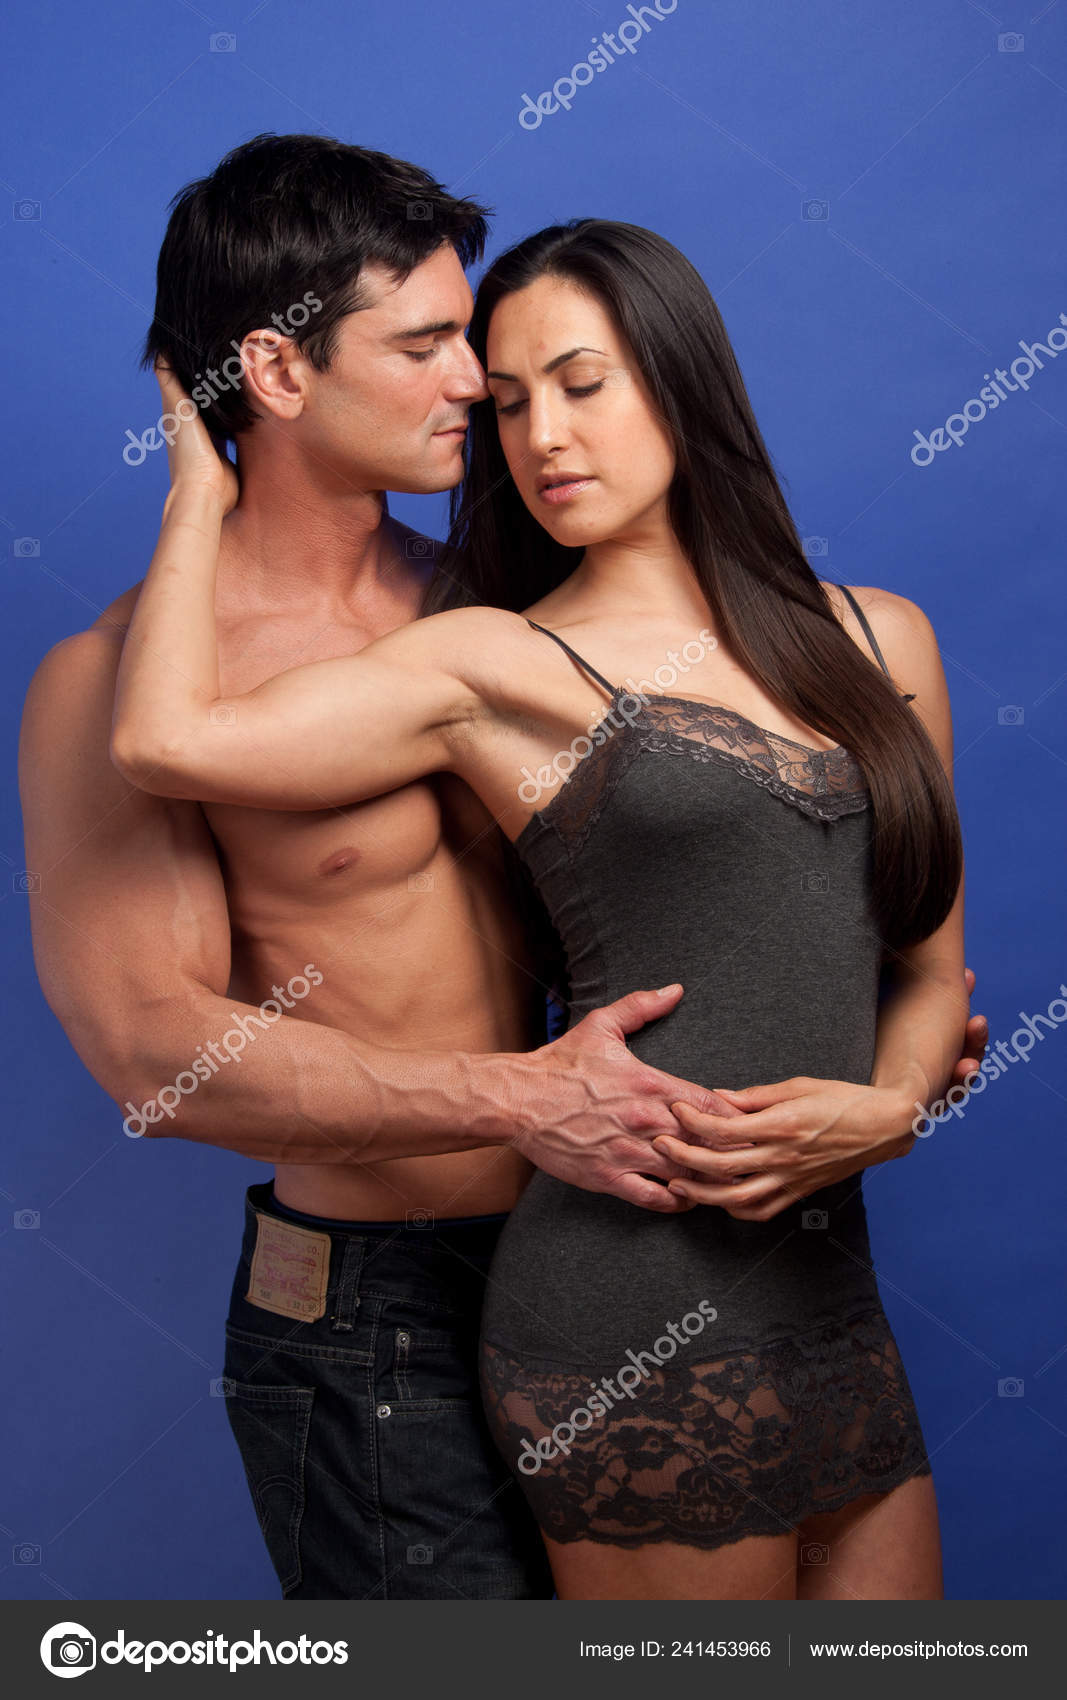 The Hot Couple Pose for the Photo Together. Stock Image - Image of face,  determination: 218442201